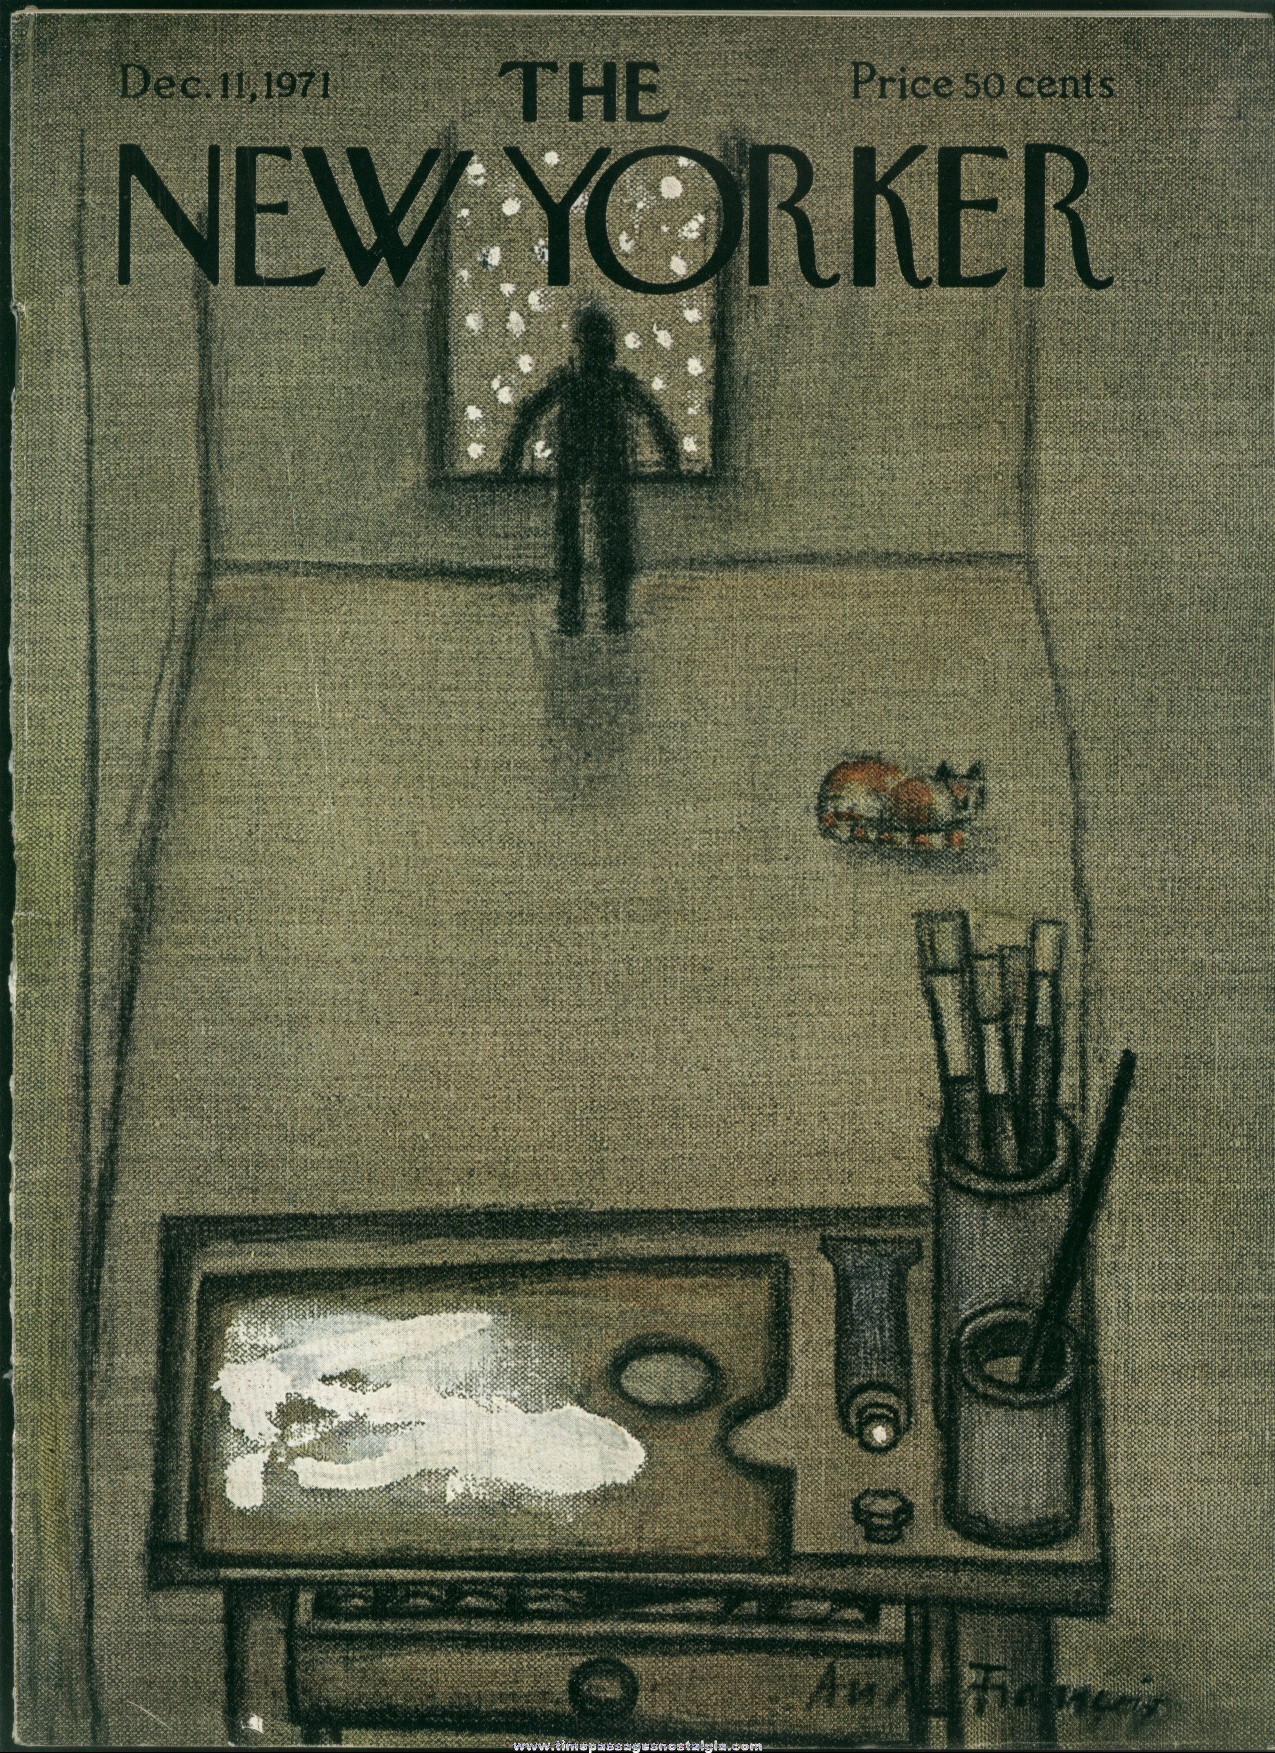 New Yorker Magazine - December 11, 1971 - Cover by Andre Francois